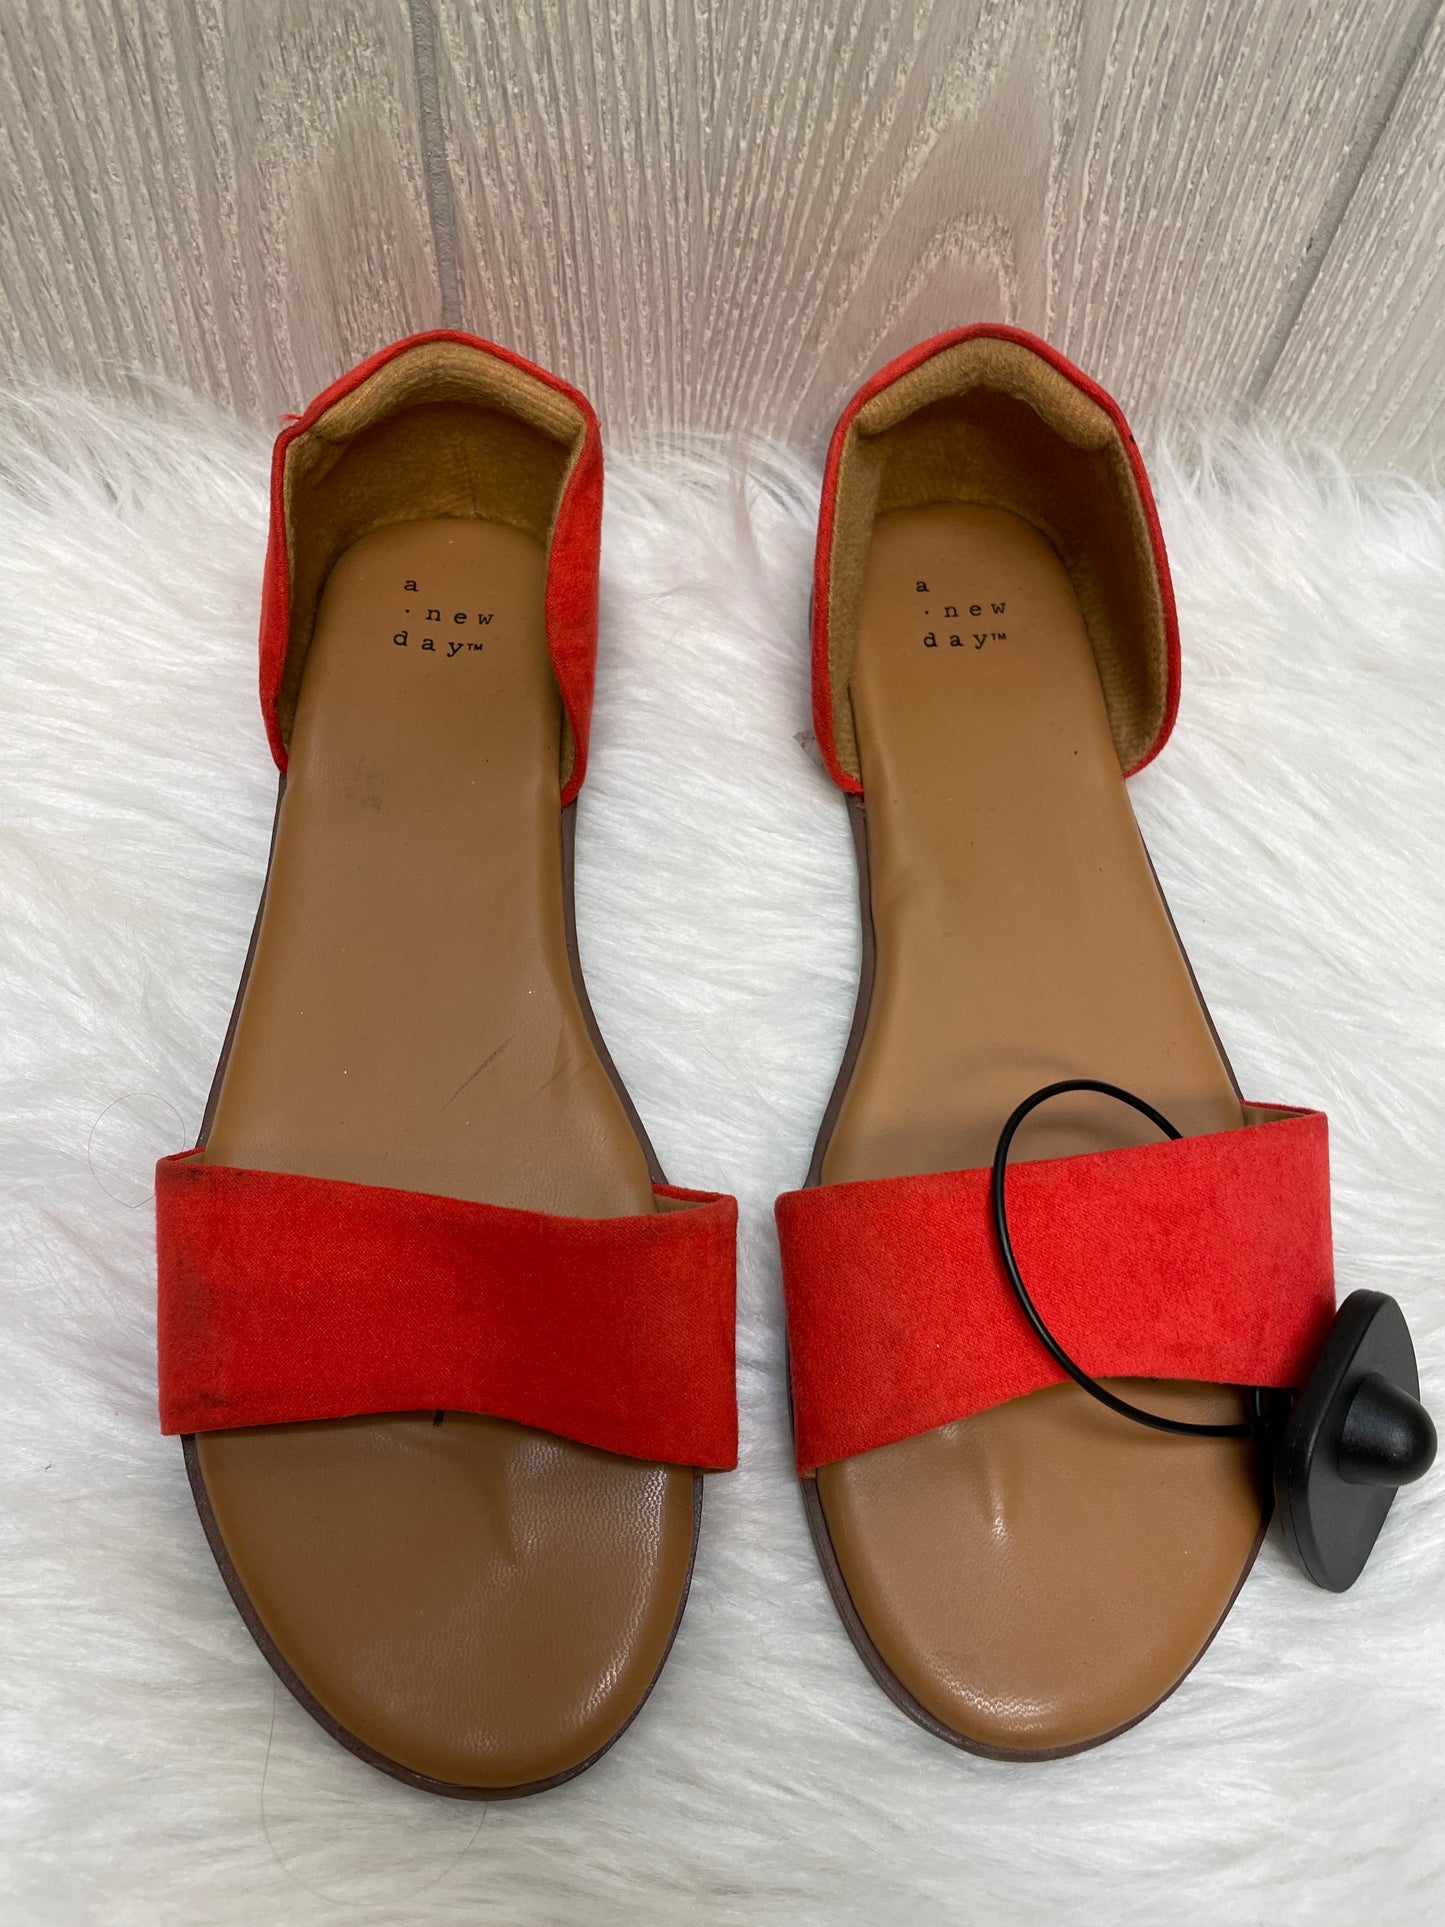 Red Sandals Flats A New Day, Size 7